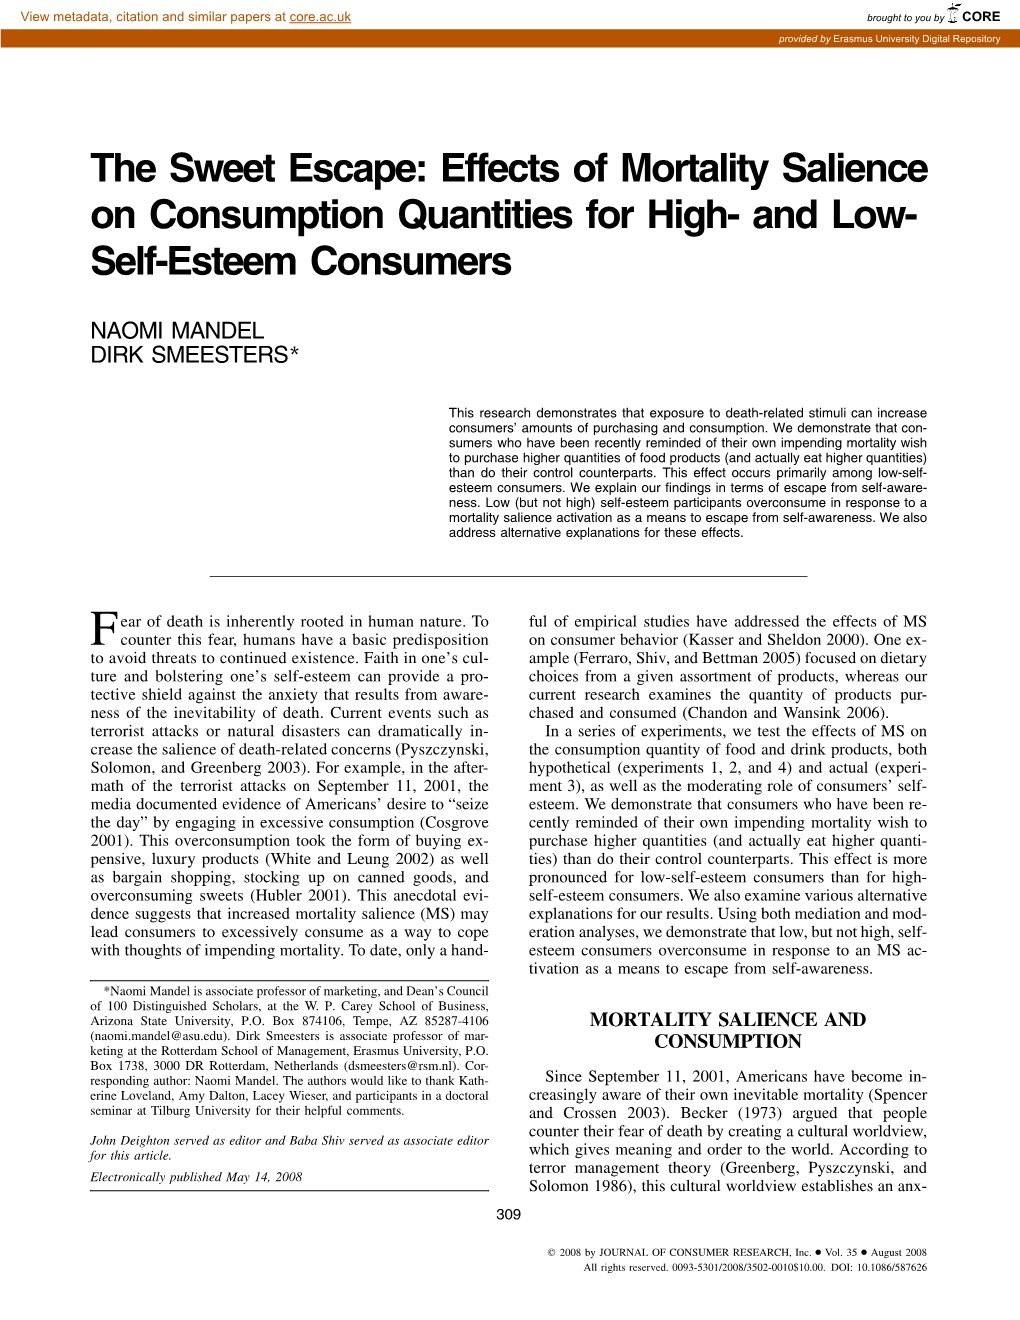 Effects of Mortality Salience on Consumption Quantities for High- and Low- Self-Esteem Consumers